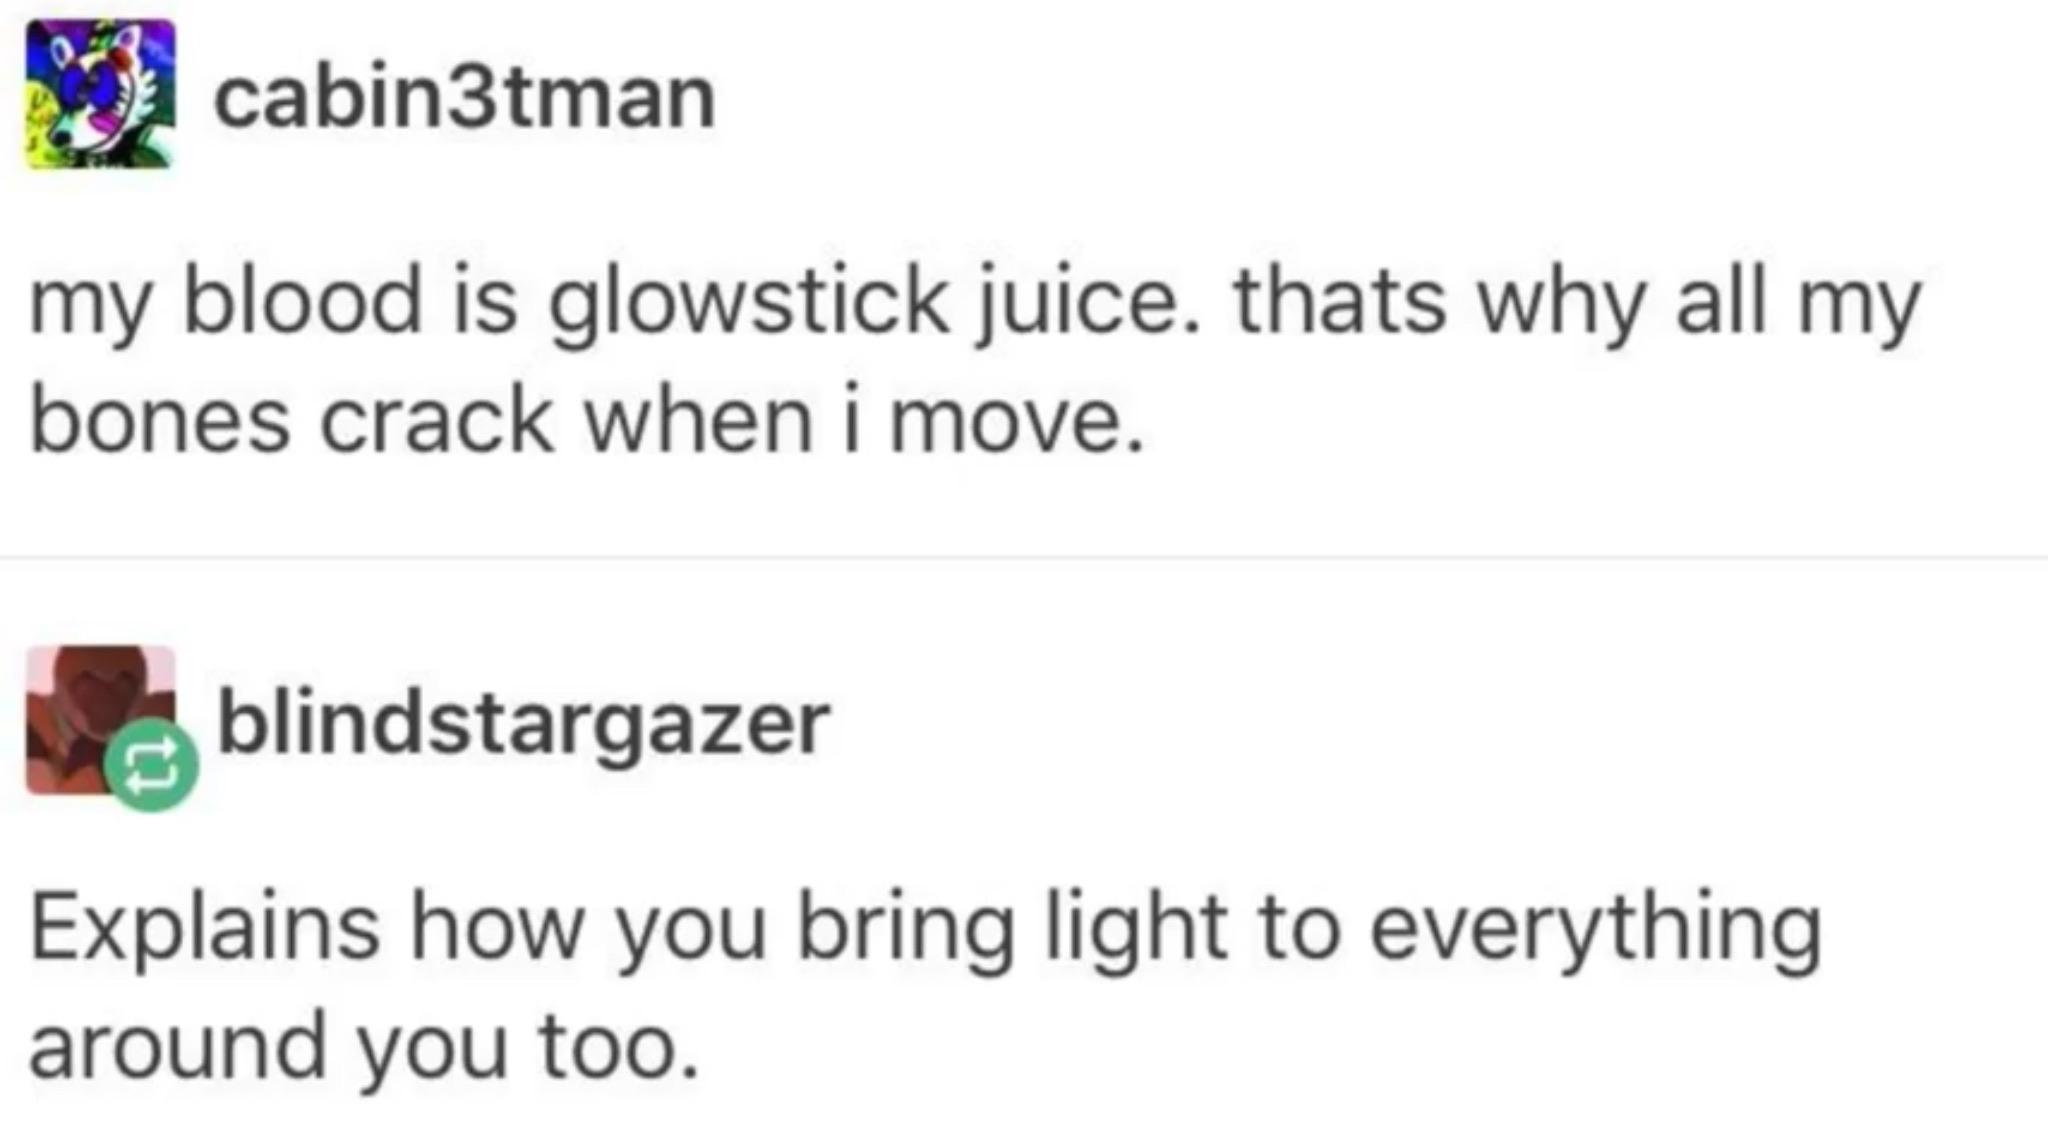 screenshot from a tumblr post with a conversation between users cabin3tman and blindstargazer. 
cabin3tman says "my blood is glowstick juice. thats why all my bones crack when I move." blindstargazer replies "Explains how you bring light to everything around you too."